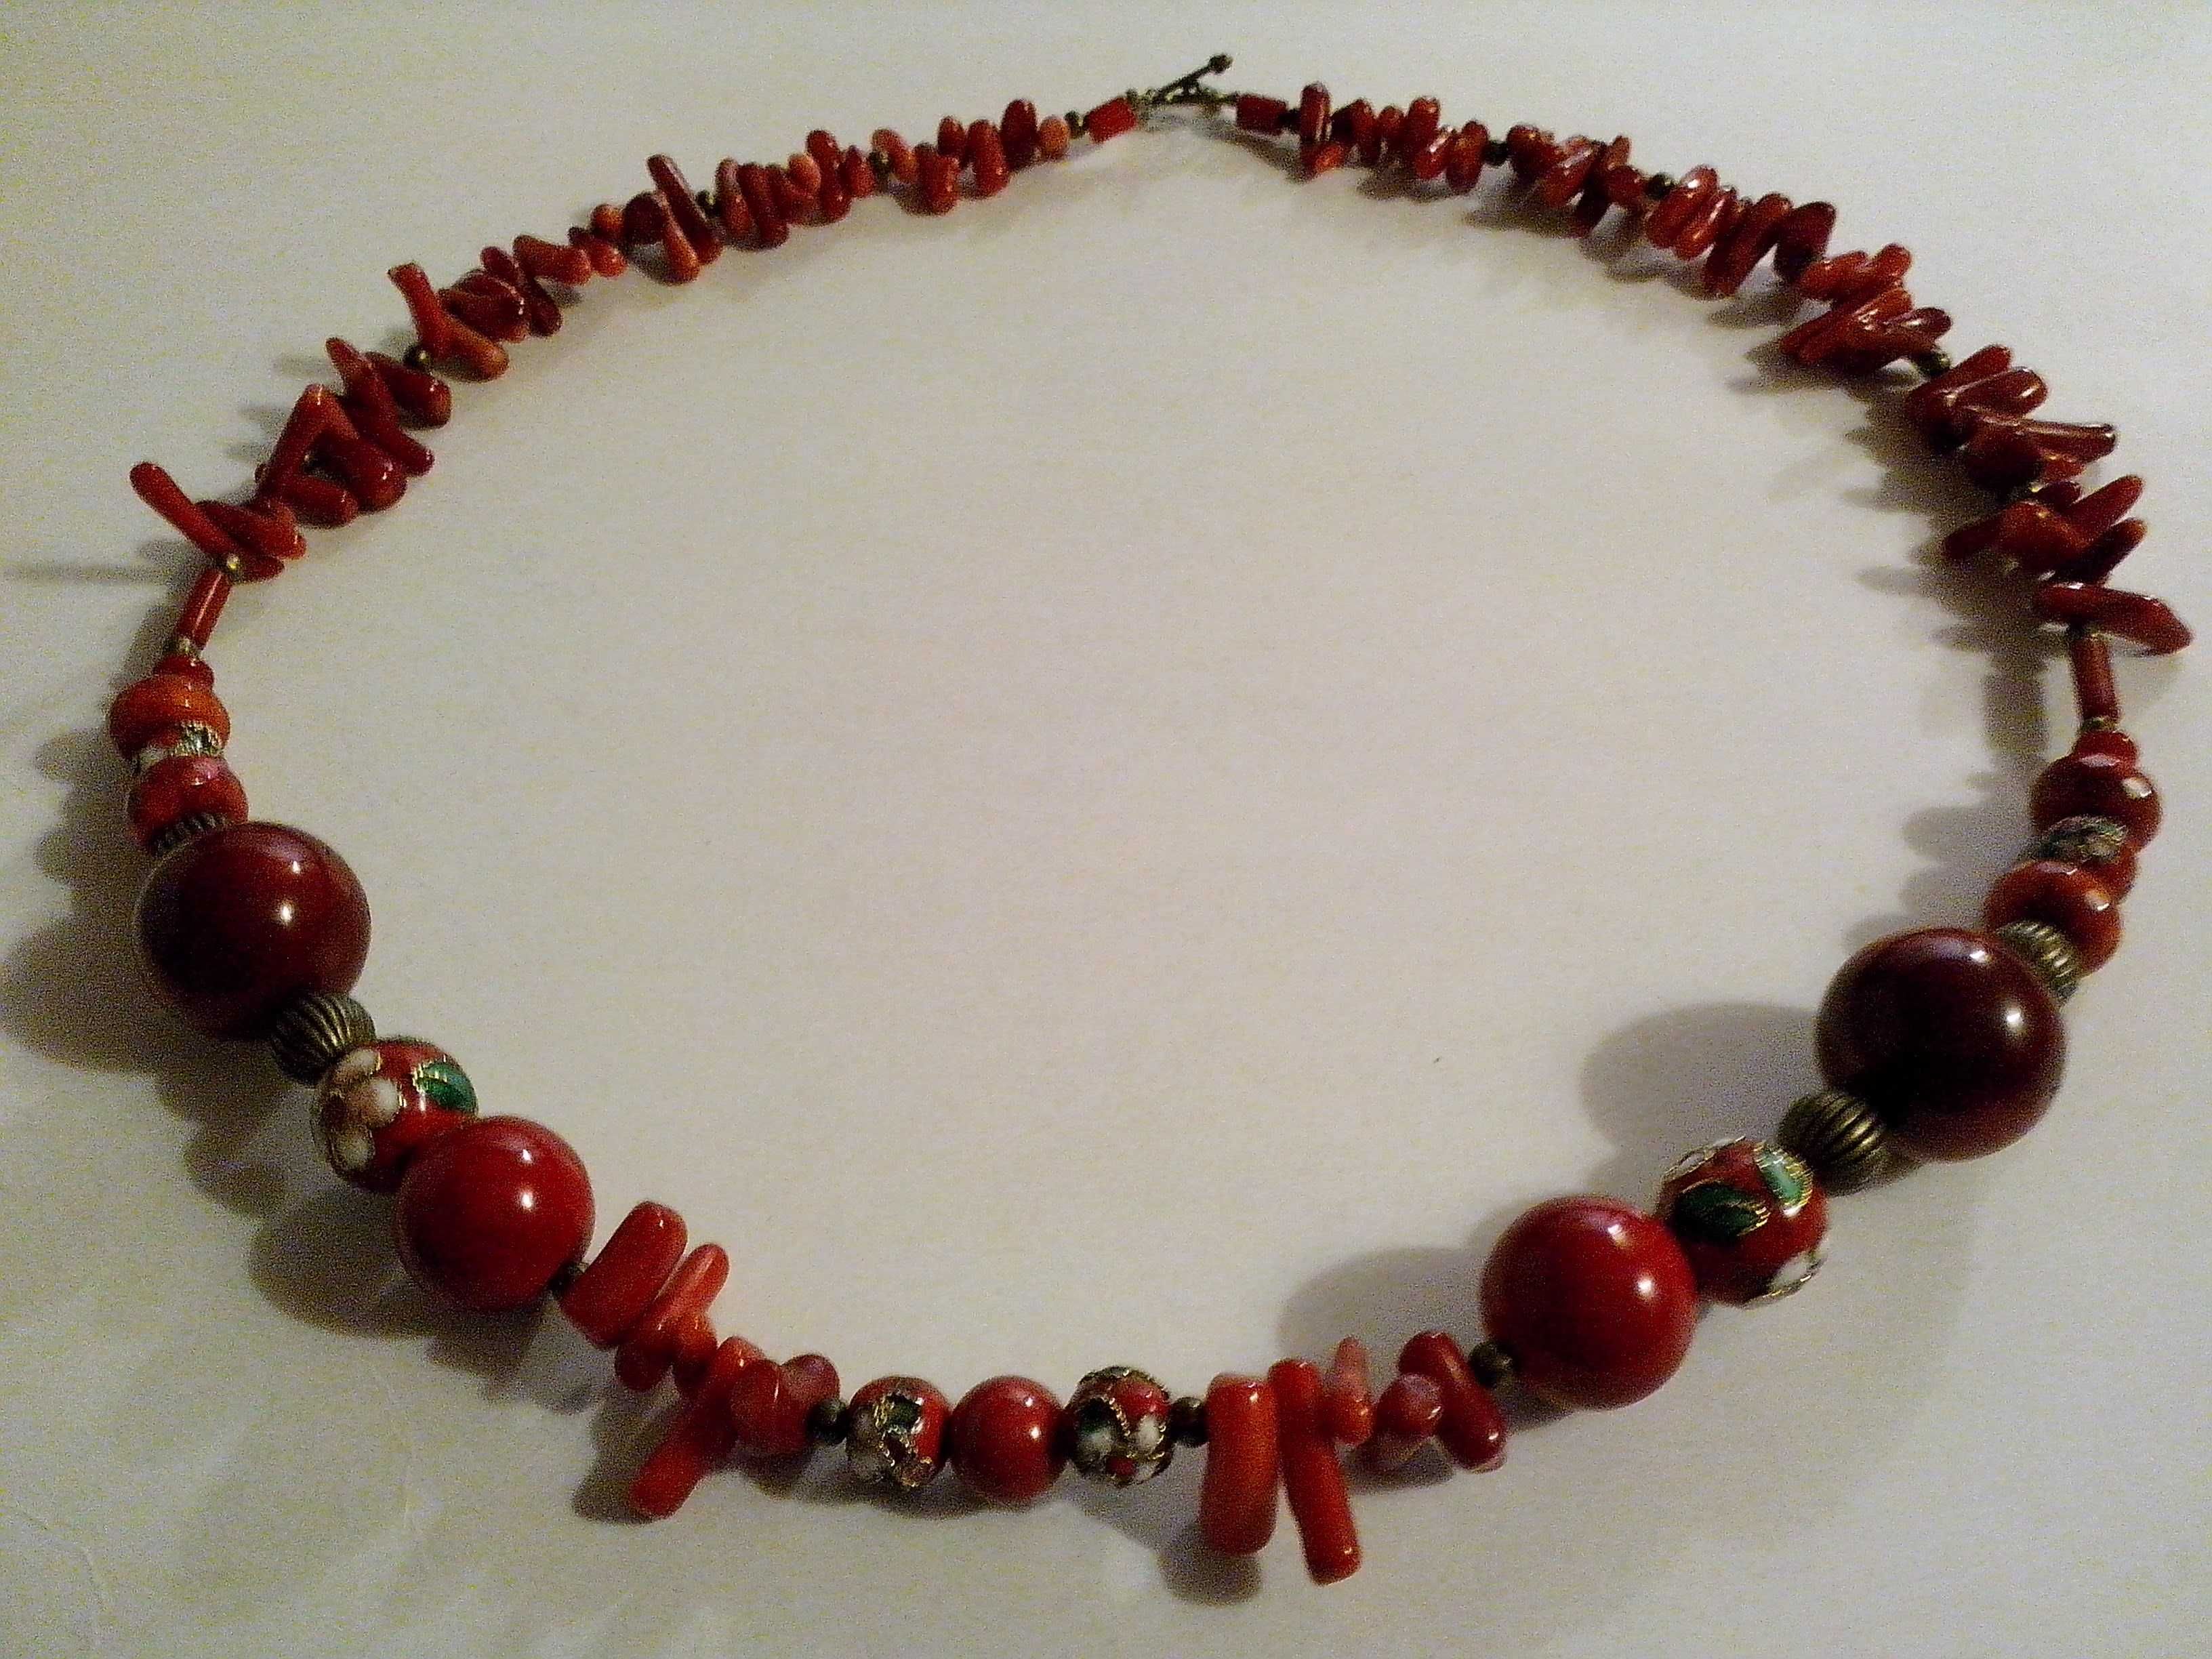 colier boho chic,coral rosu si perle cloisonnee email